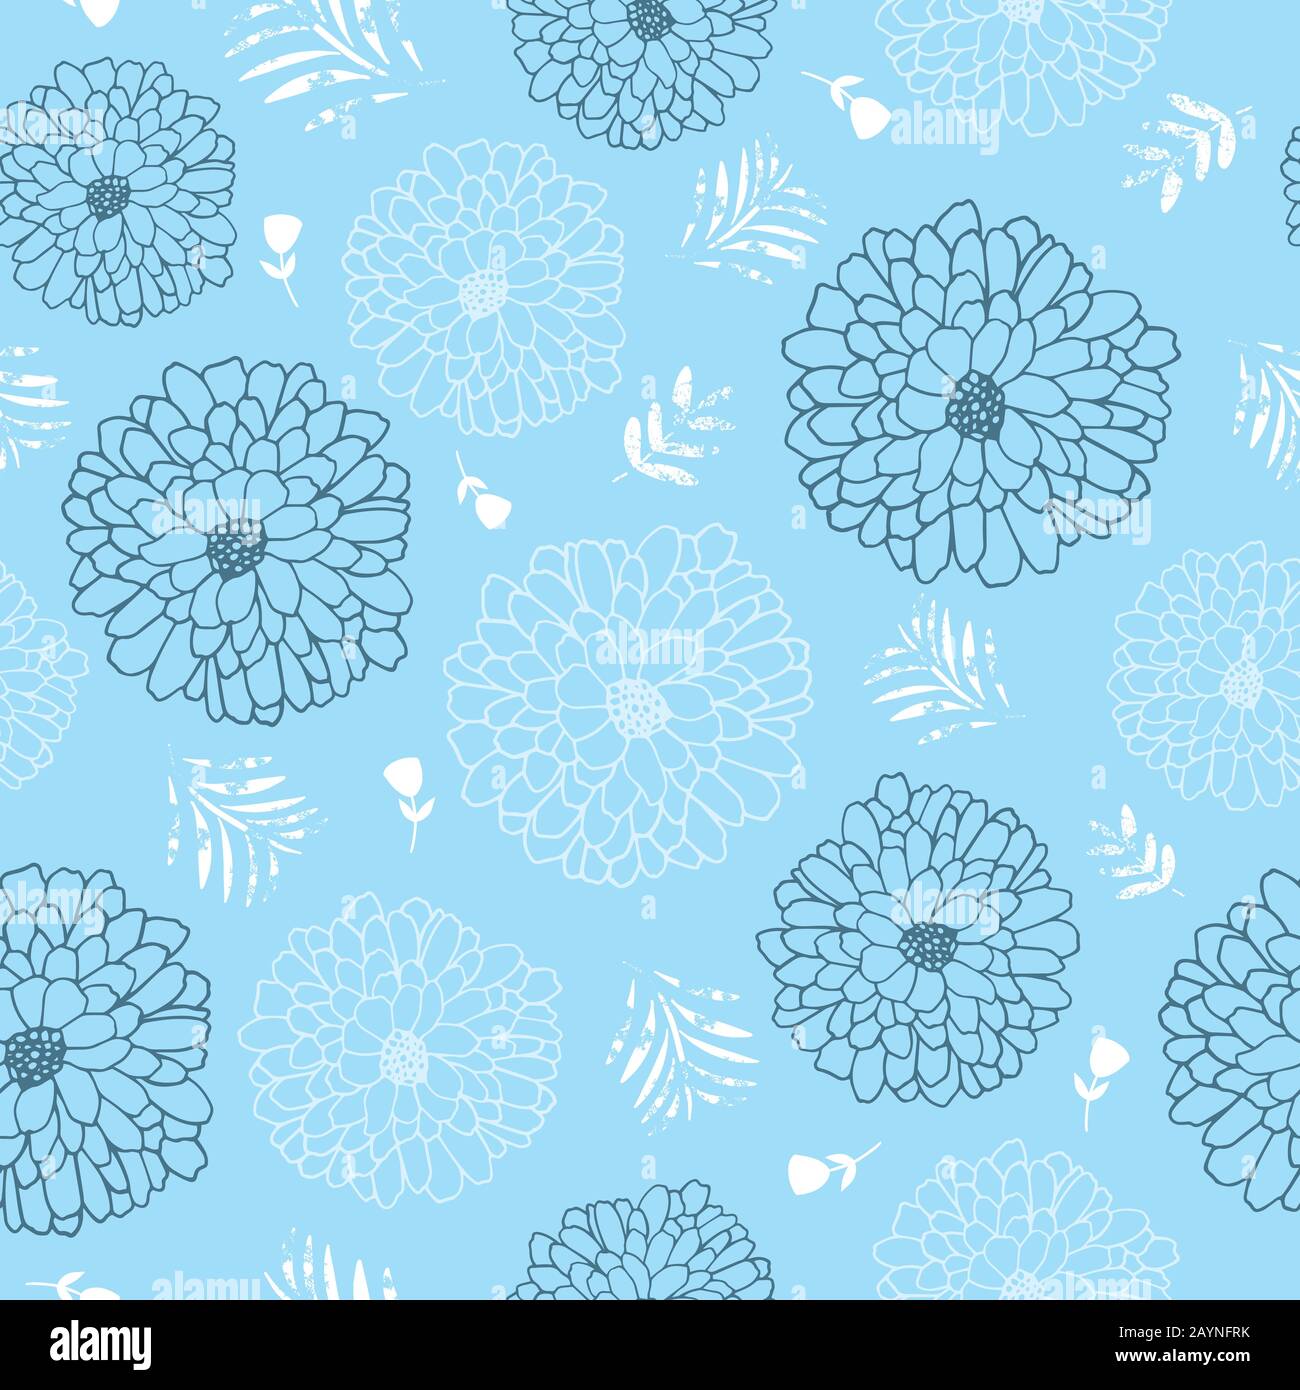 Blue and white flowers seamless repeat pattern. Perfect for backgrounds, wallpaper, textile design and home decor. Vector illustration. Stock Vector